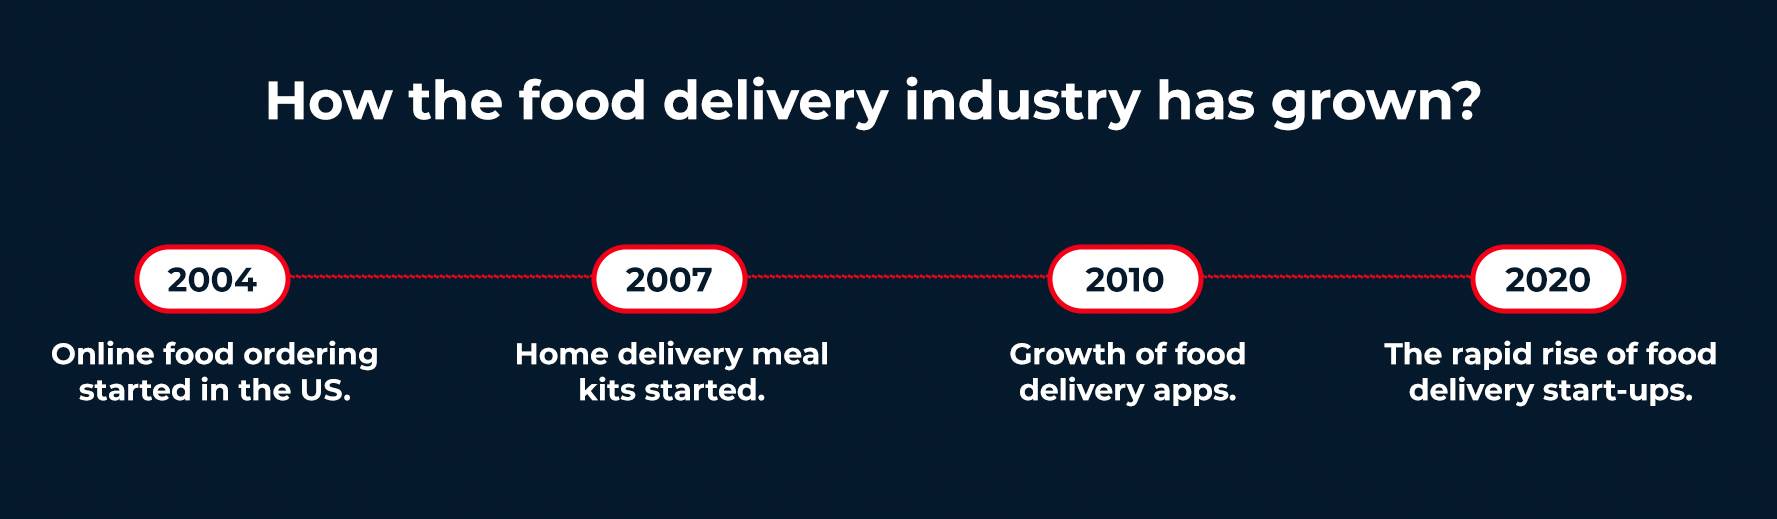 Food Delivery Industry Growth Food Delivery Industry Growth